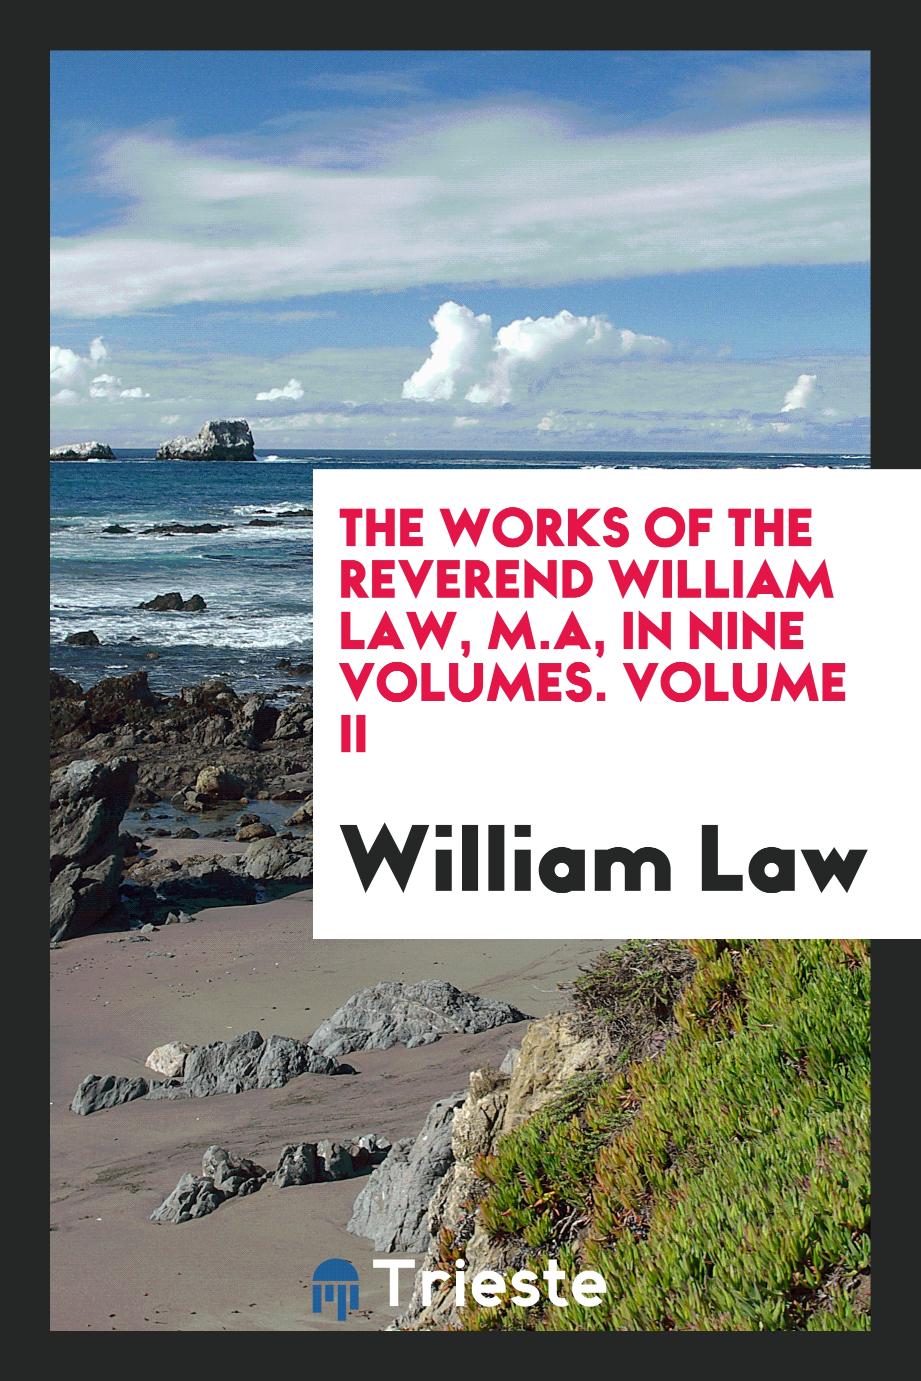 The works of the Reverend William Law, M.A, In nine volumes. Volume II